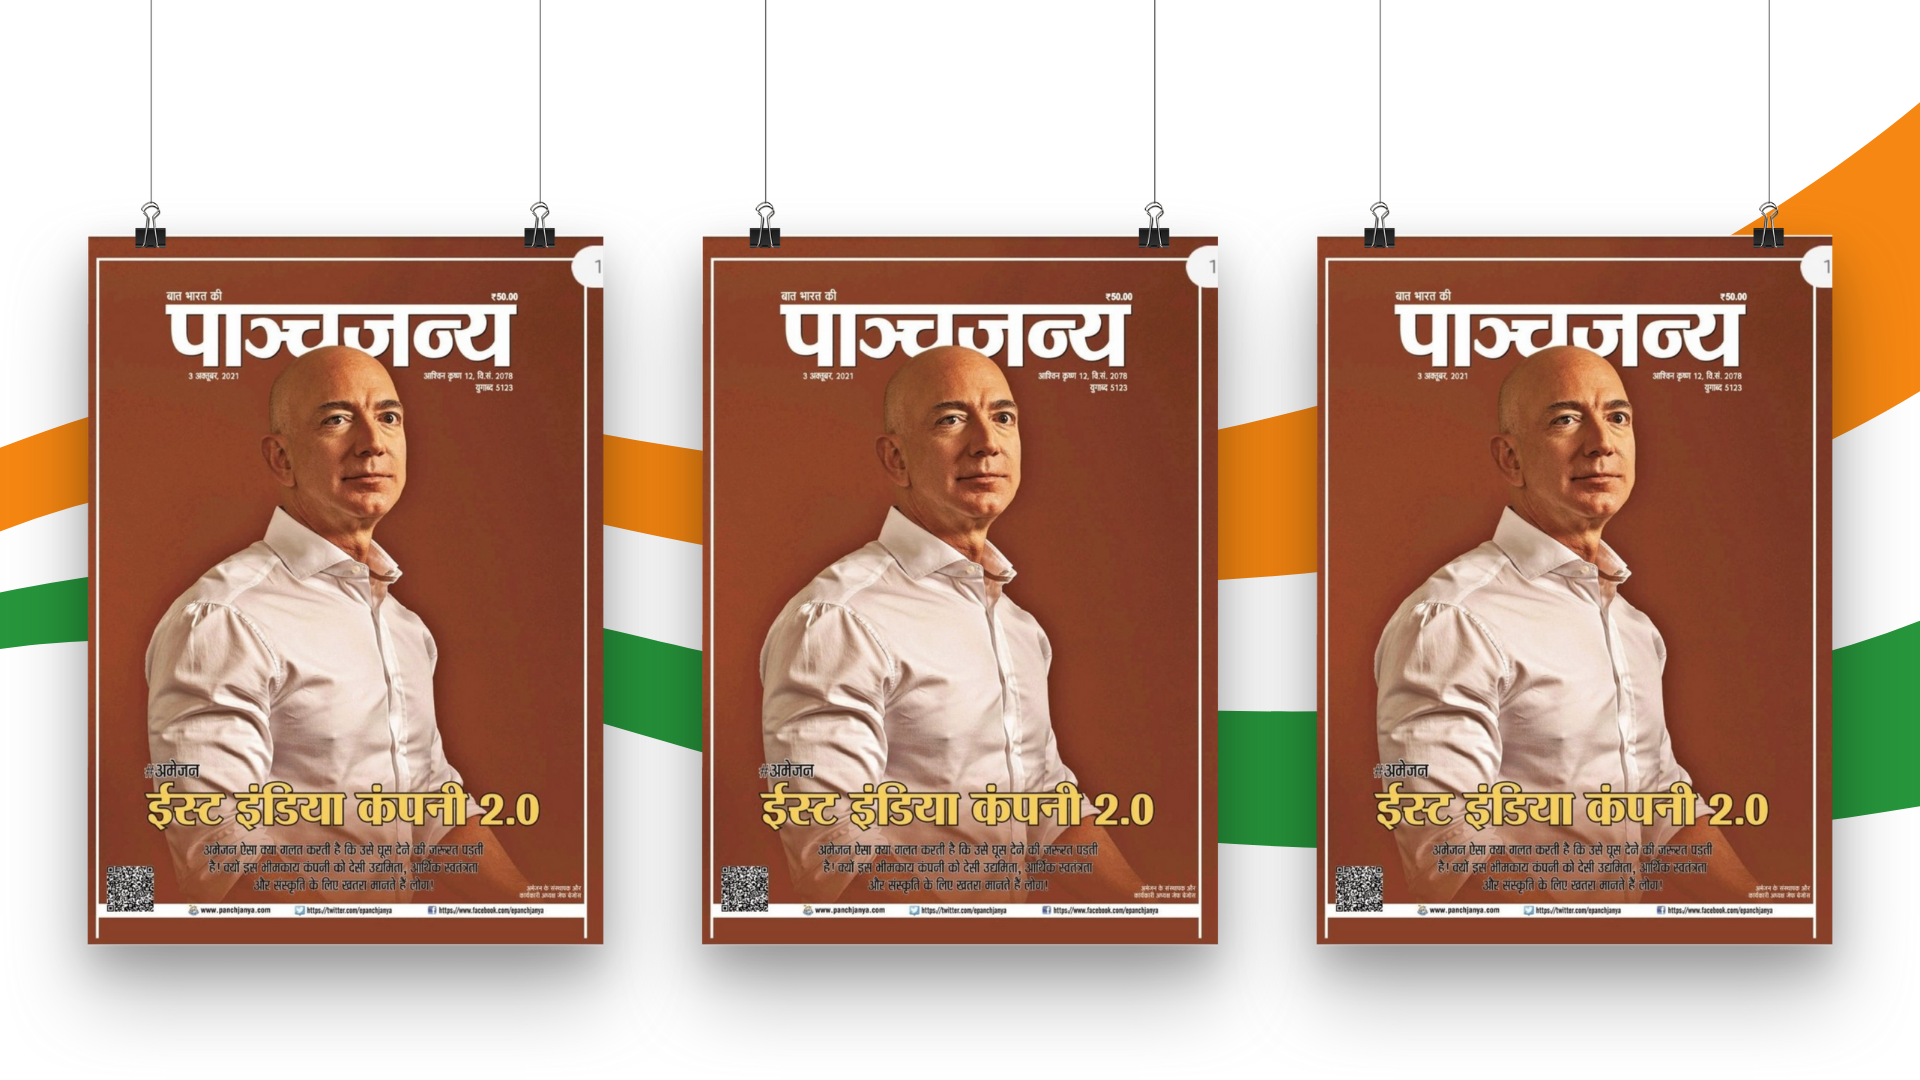 Amazon's Jeff Bezos Is on the Wrong Indian Magazine Cover Before 